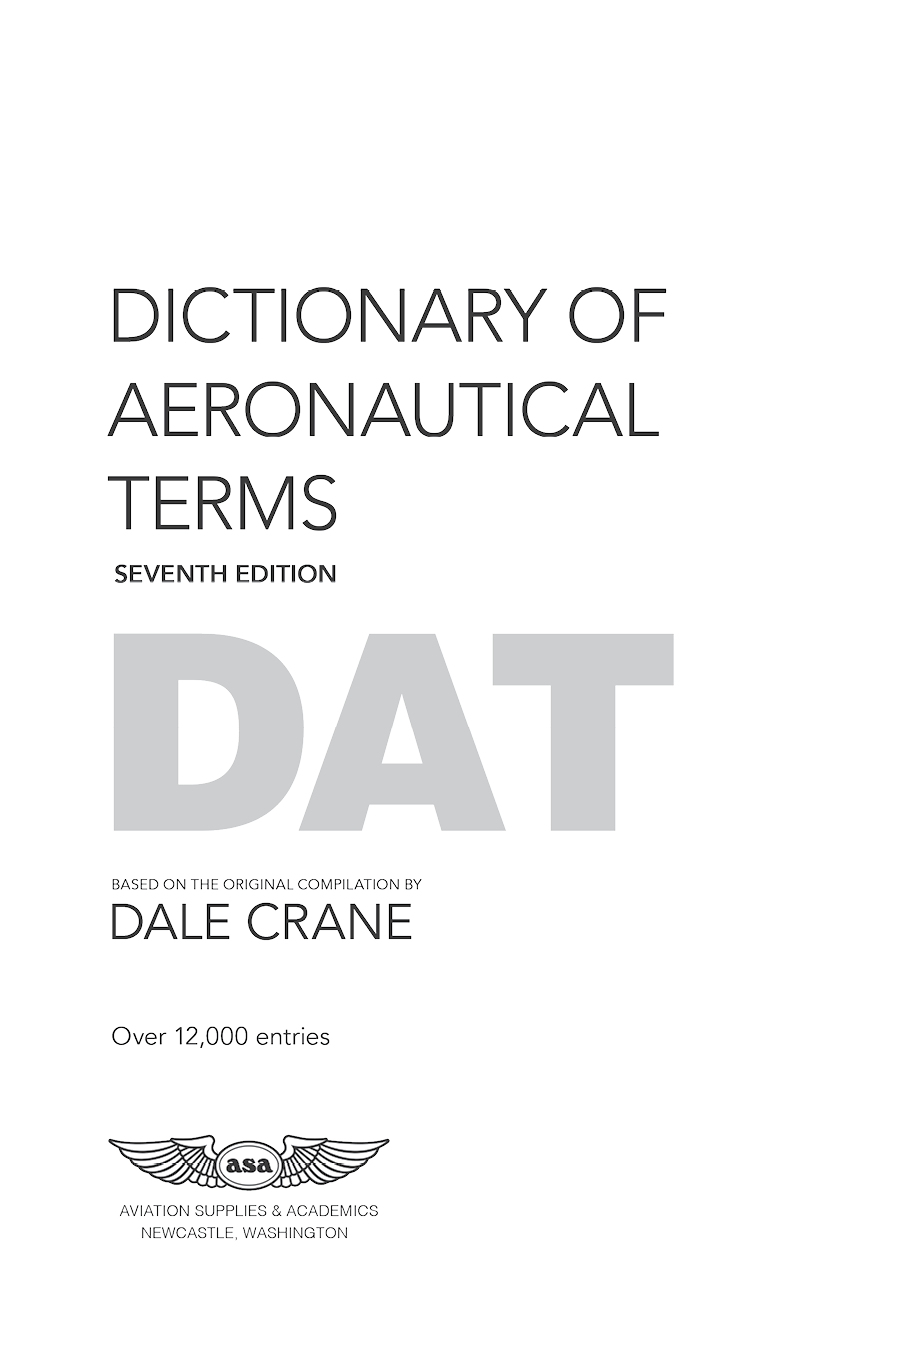 Dictionary of Aeronautical Terms Seventh Edition by the ASA Editorial Staff - photo 2